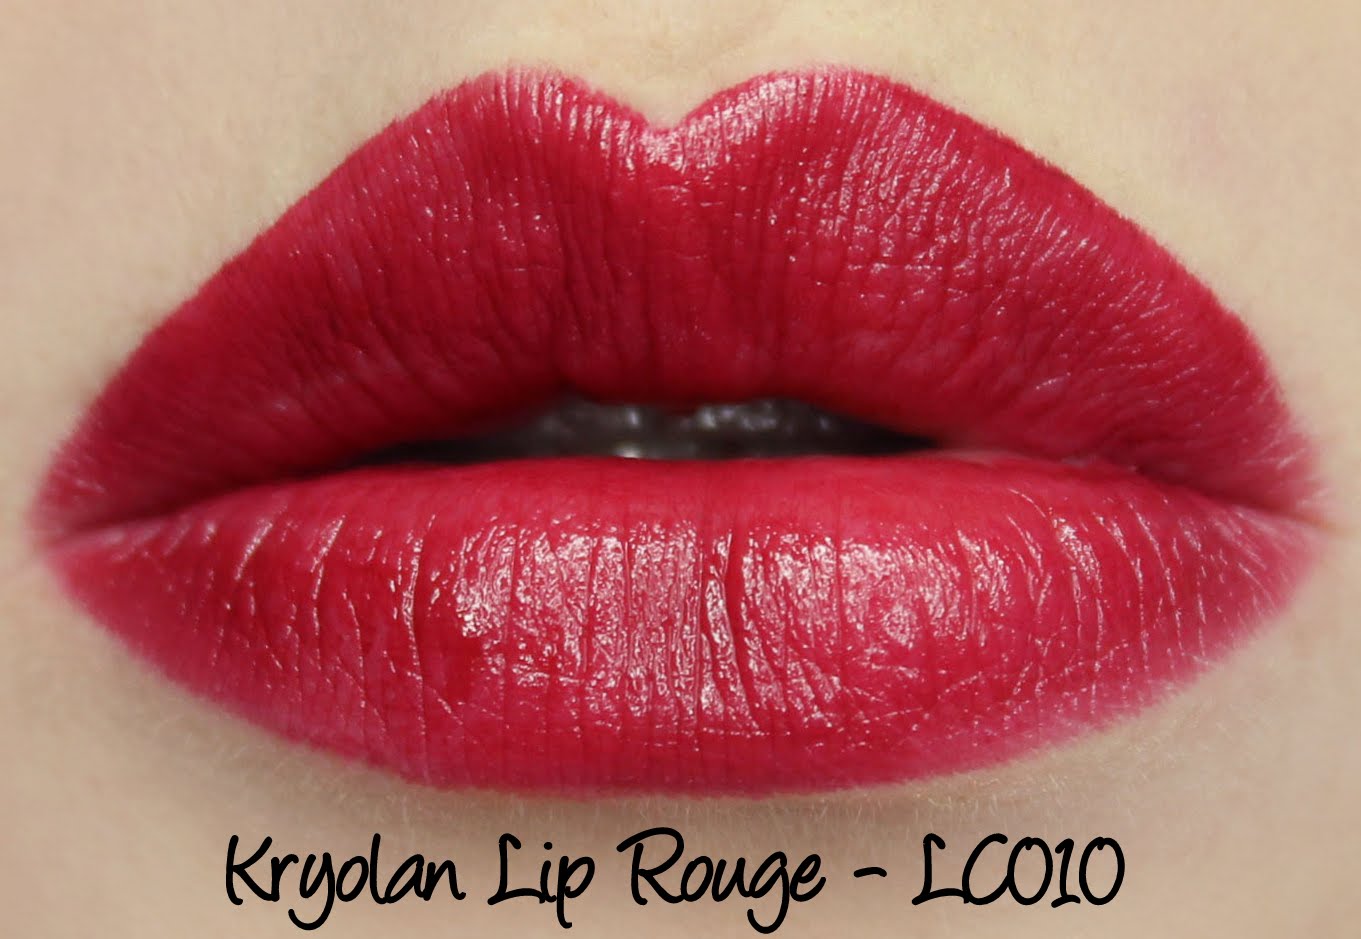 Kryolan Lip Rouge Classic Lipstick LC010 Swatches & Review